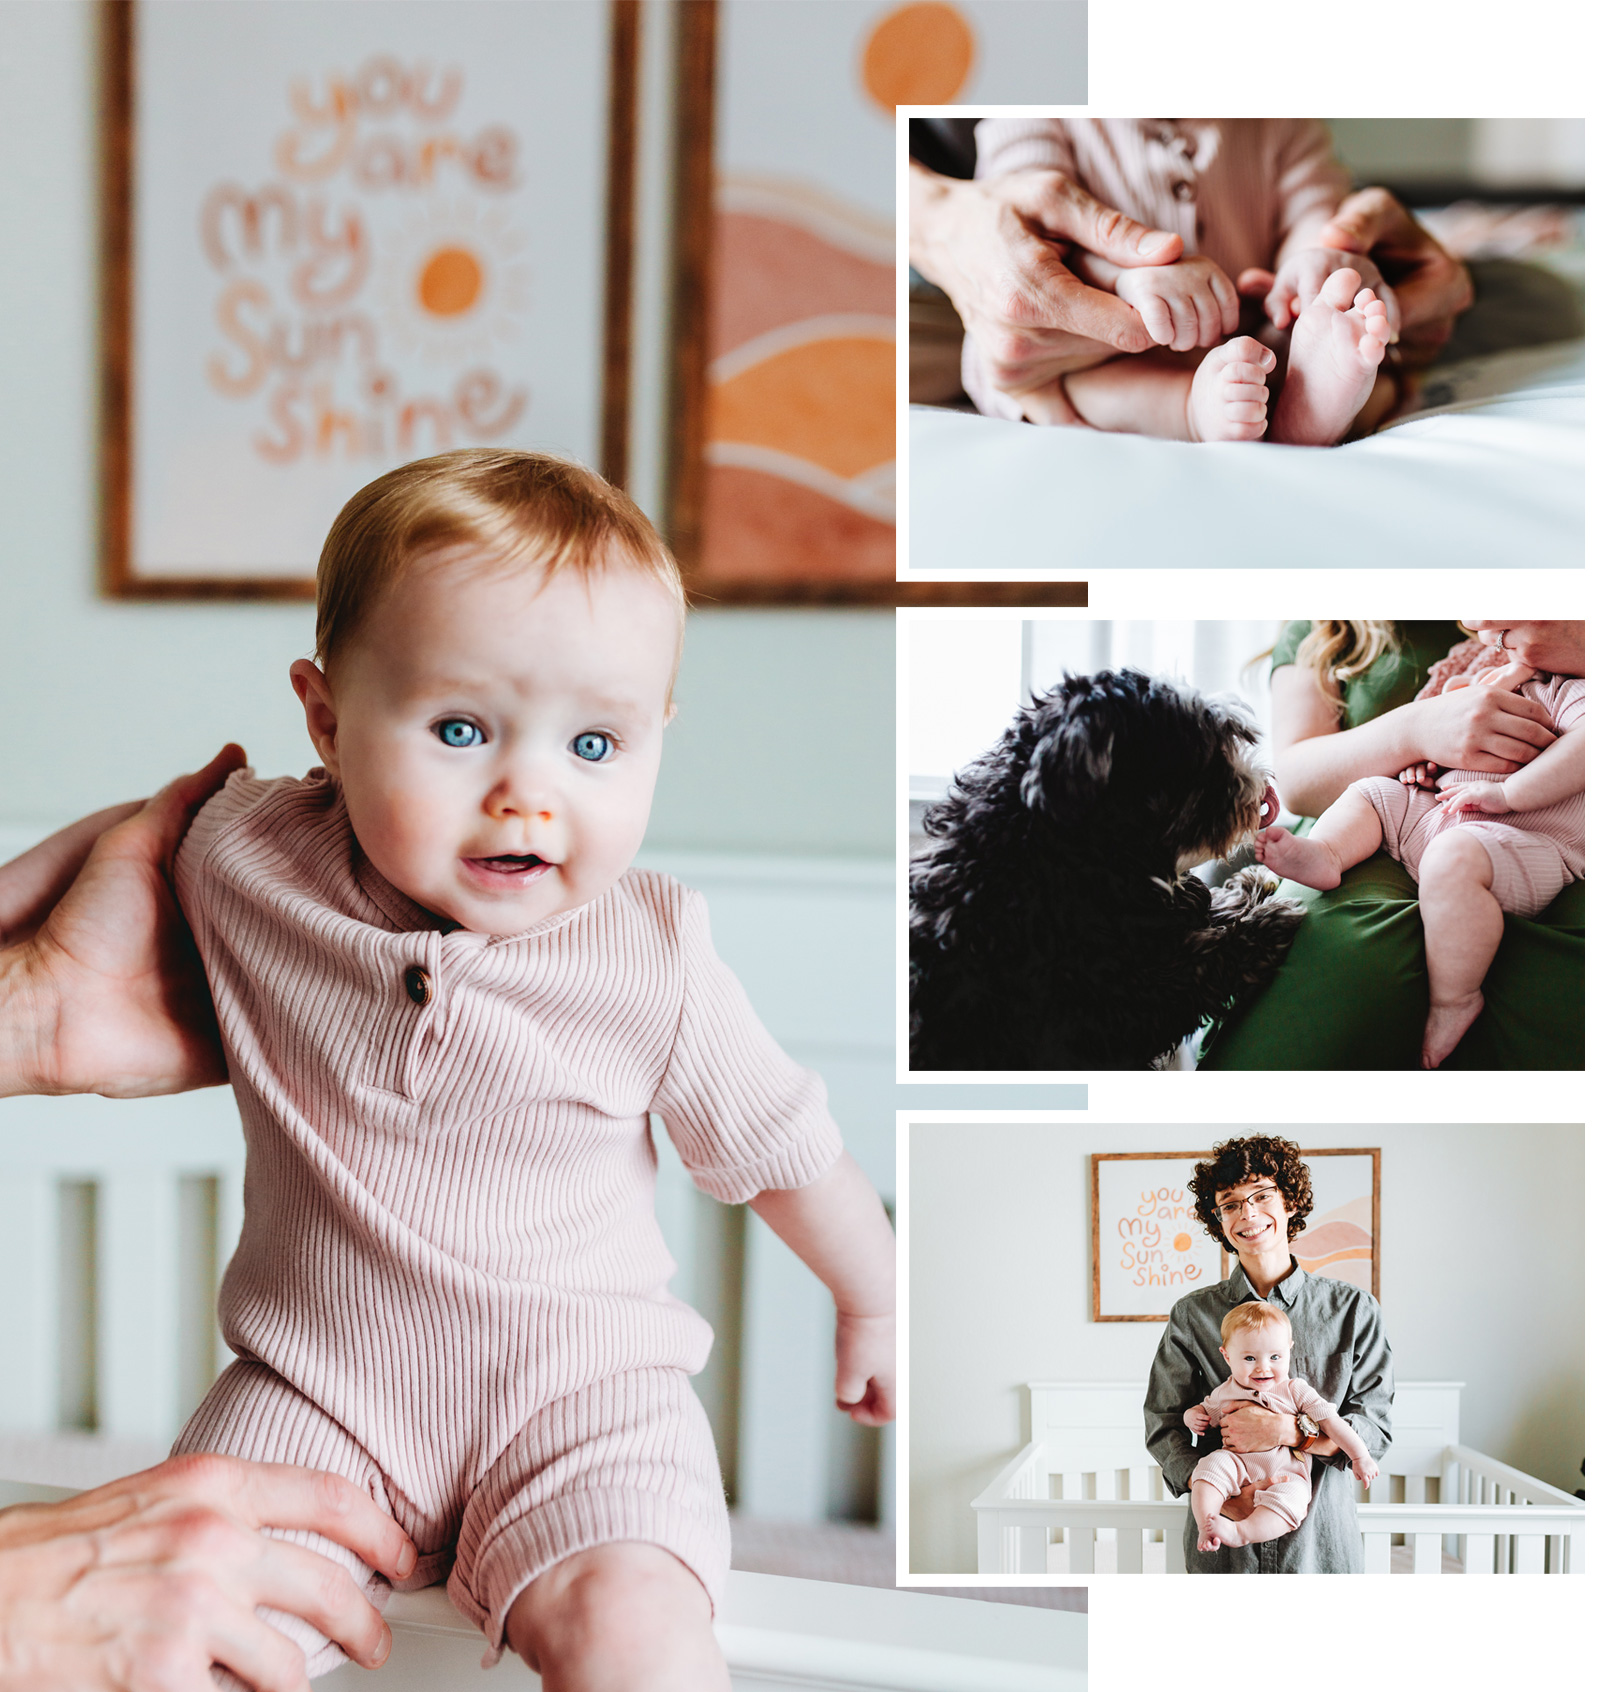 5 Reasons You Will Love an In-Home Photo Session in Dallas, Texas